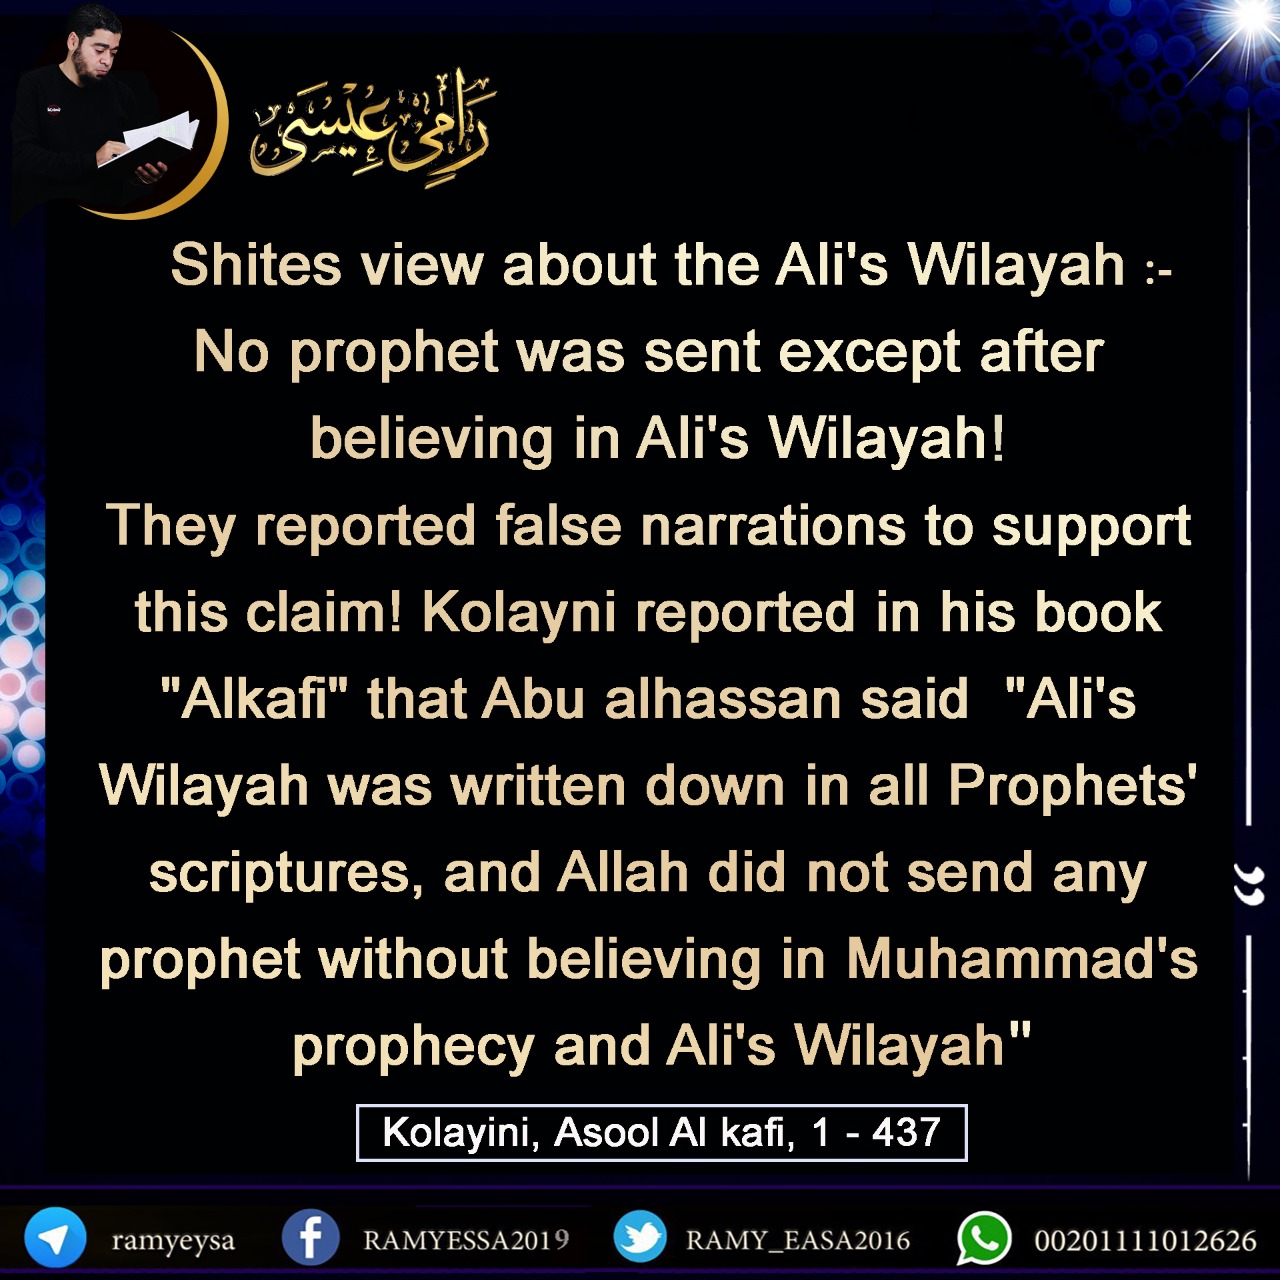 Shites view about the Ali's Wilayah